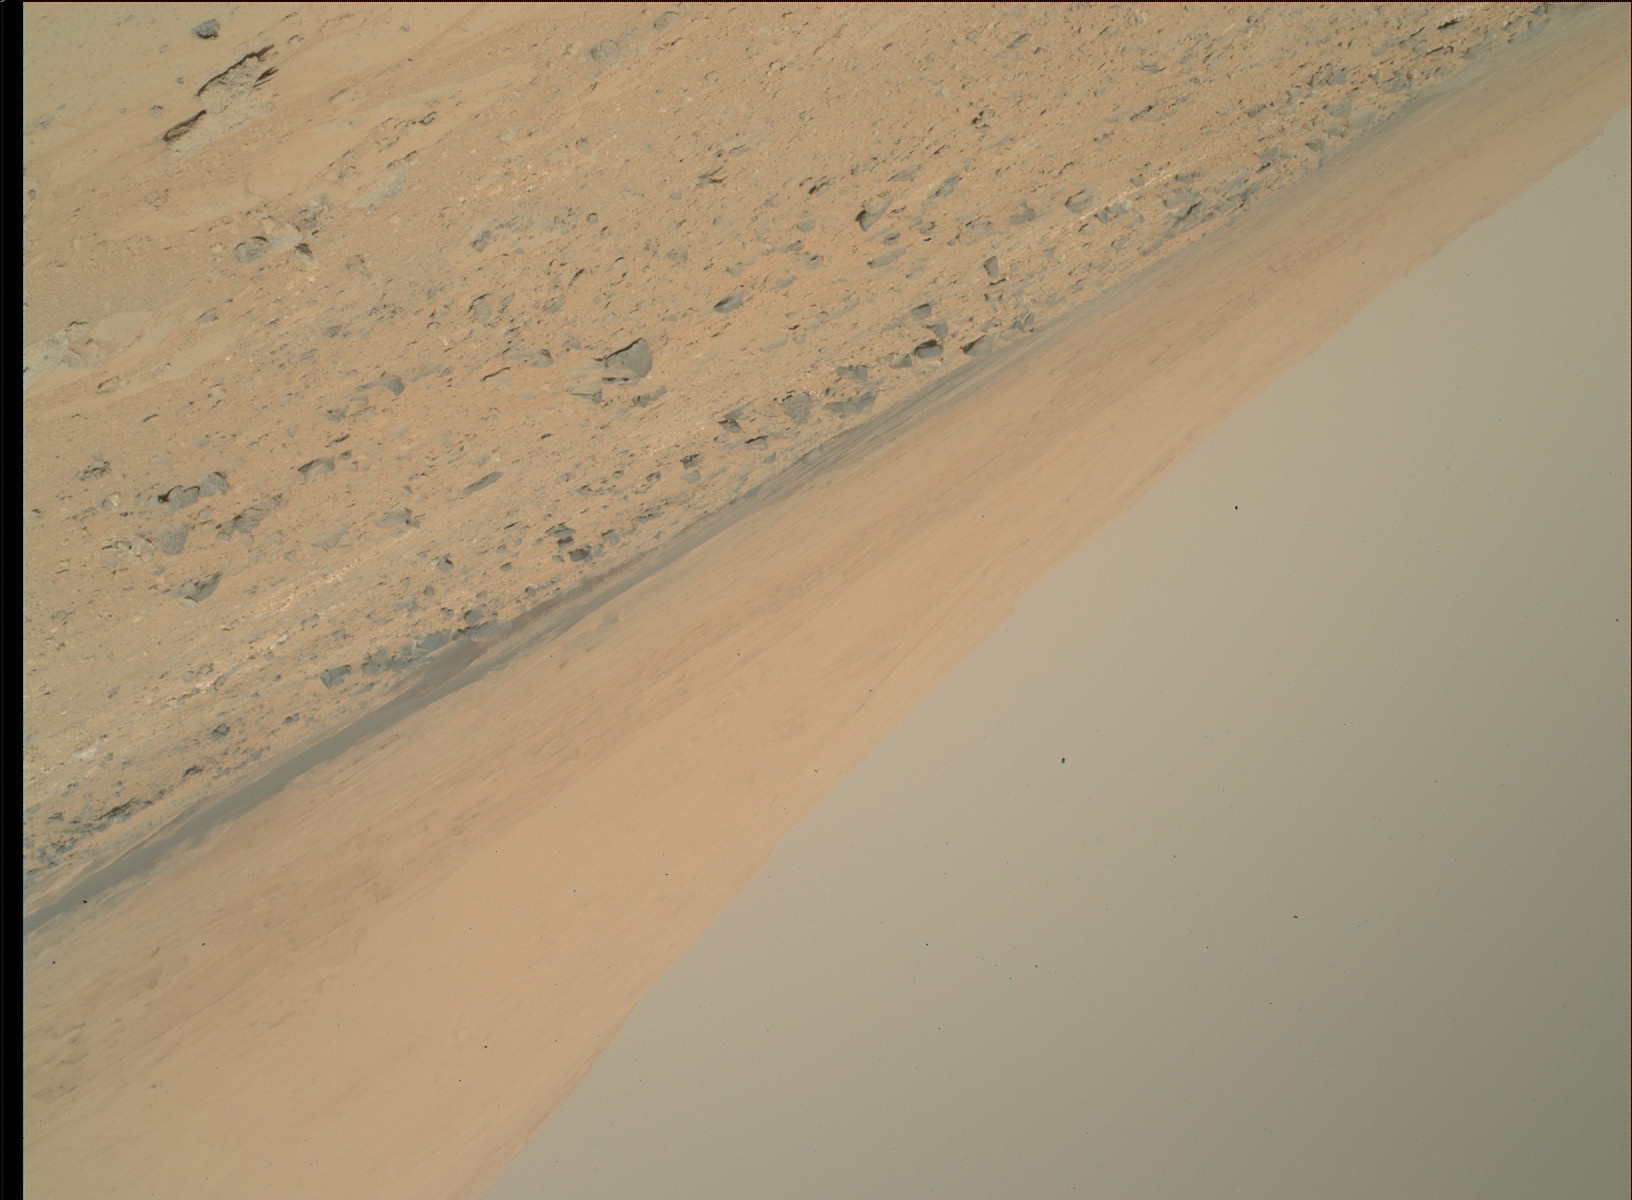 Nasa's Mars rover Curiosity acquired this image using its Mars Hand Lens Imager (MAHLI) on Sol 412